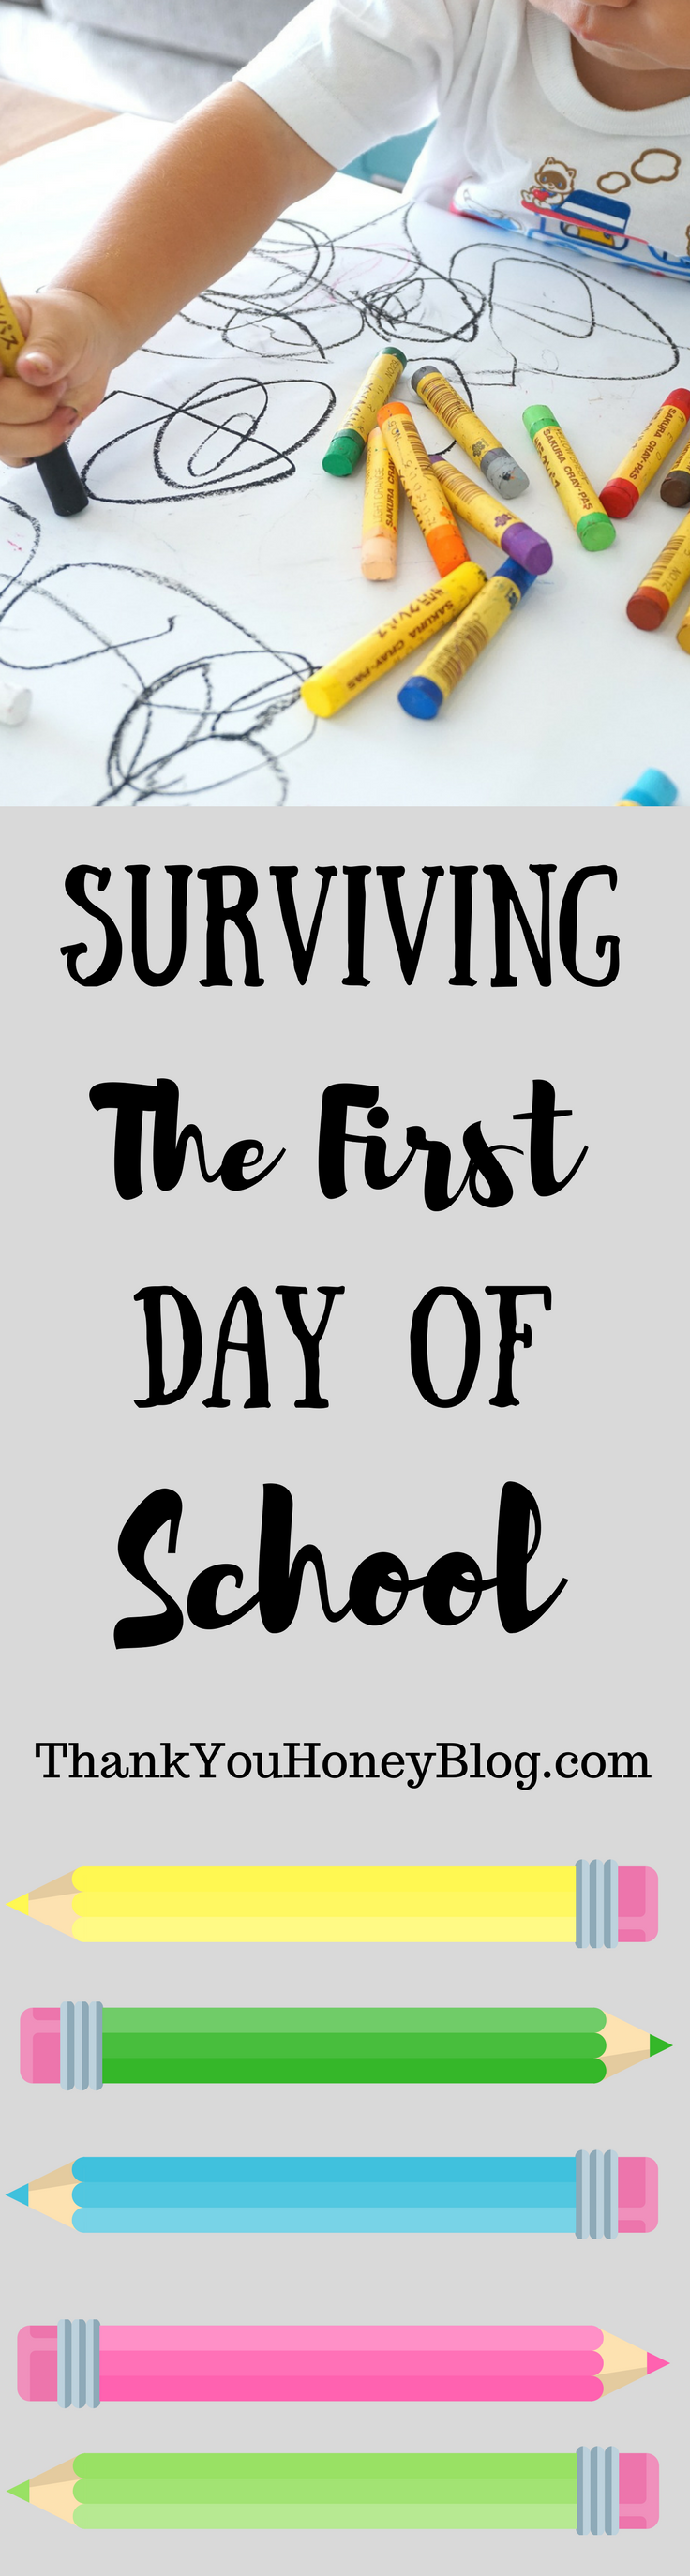 Surviving the First Day of School